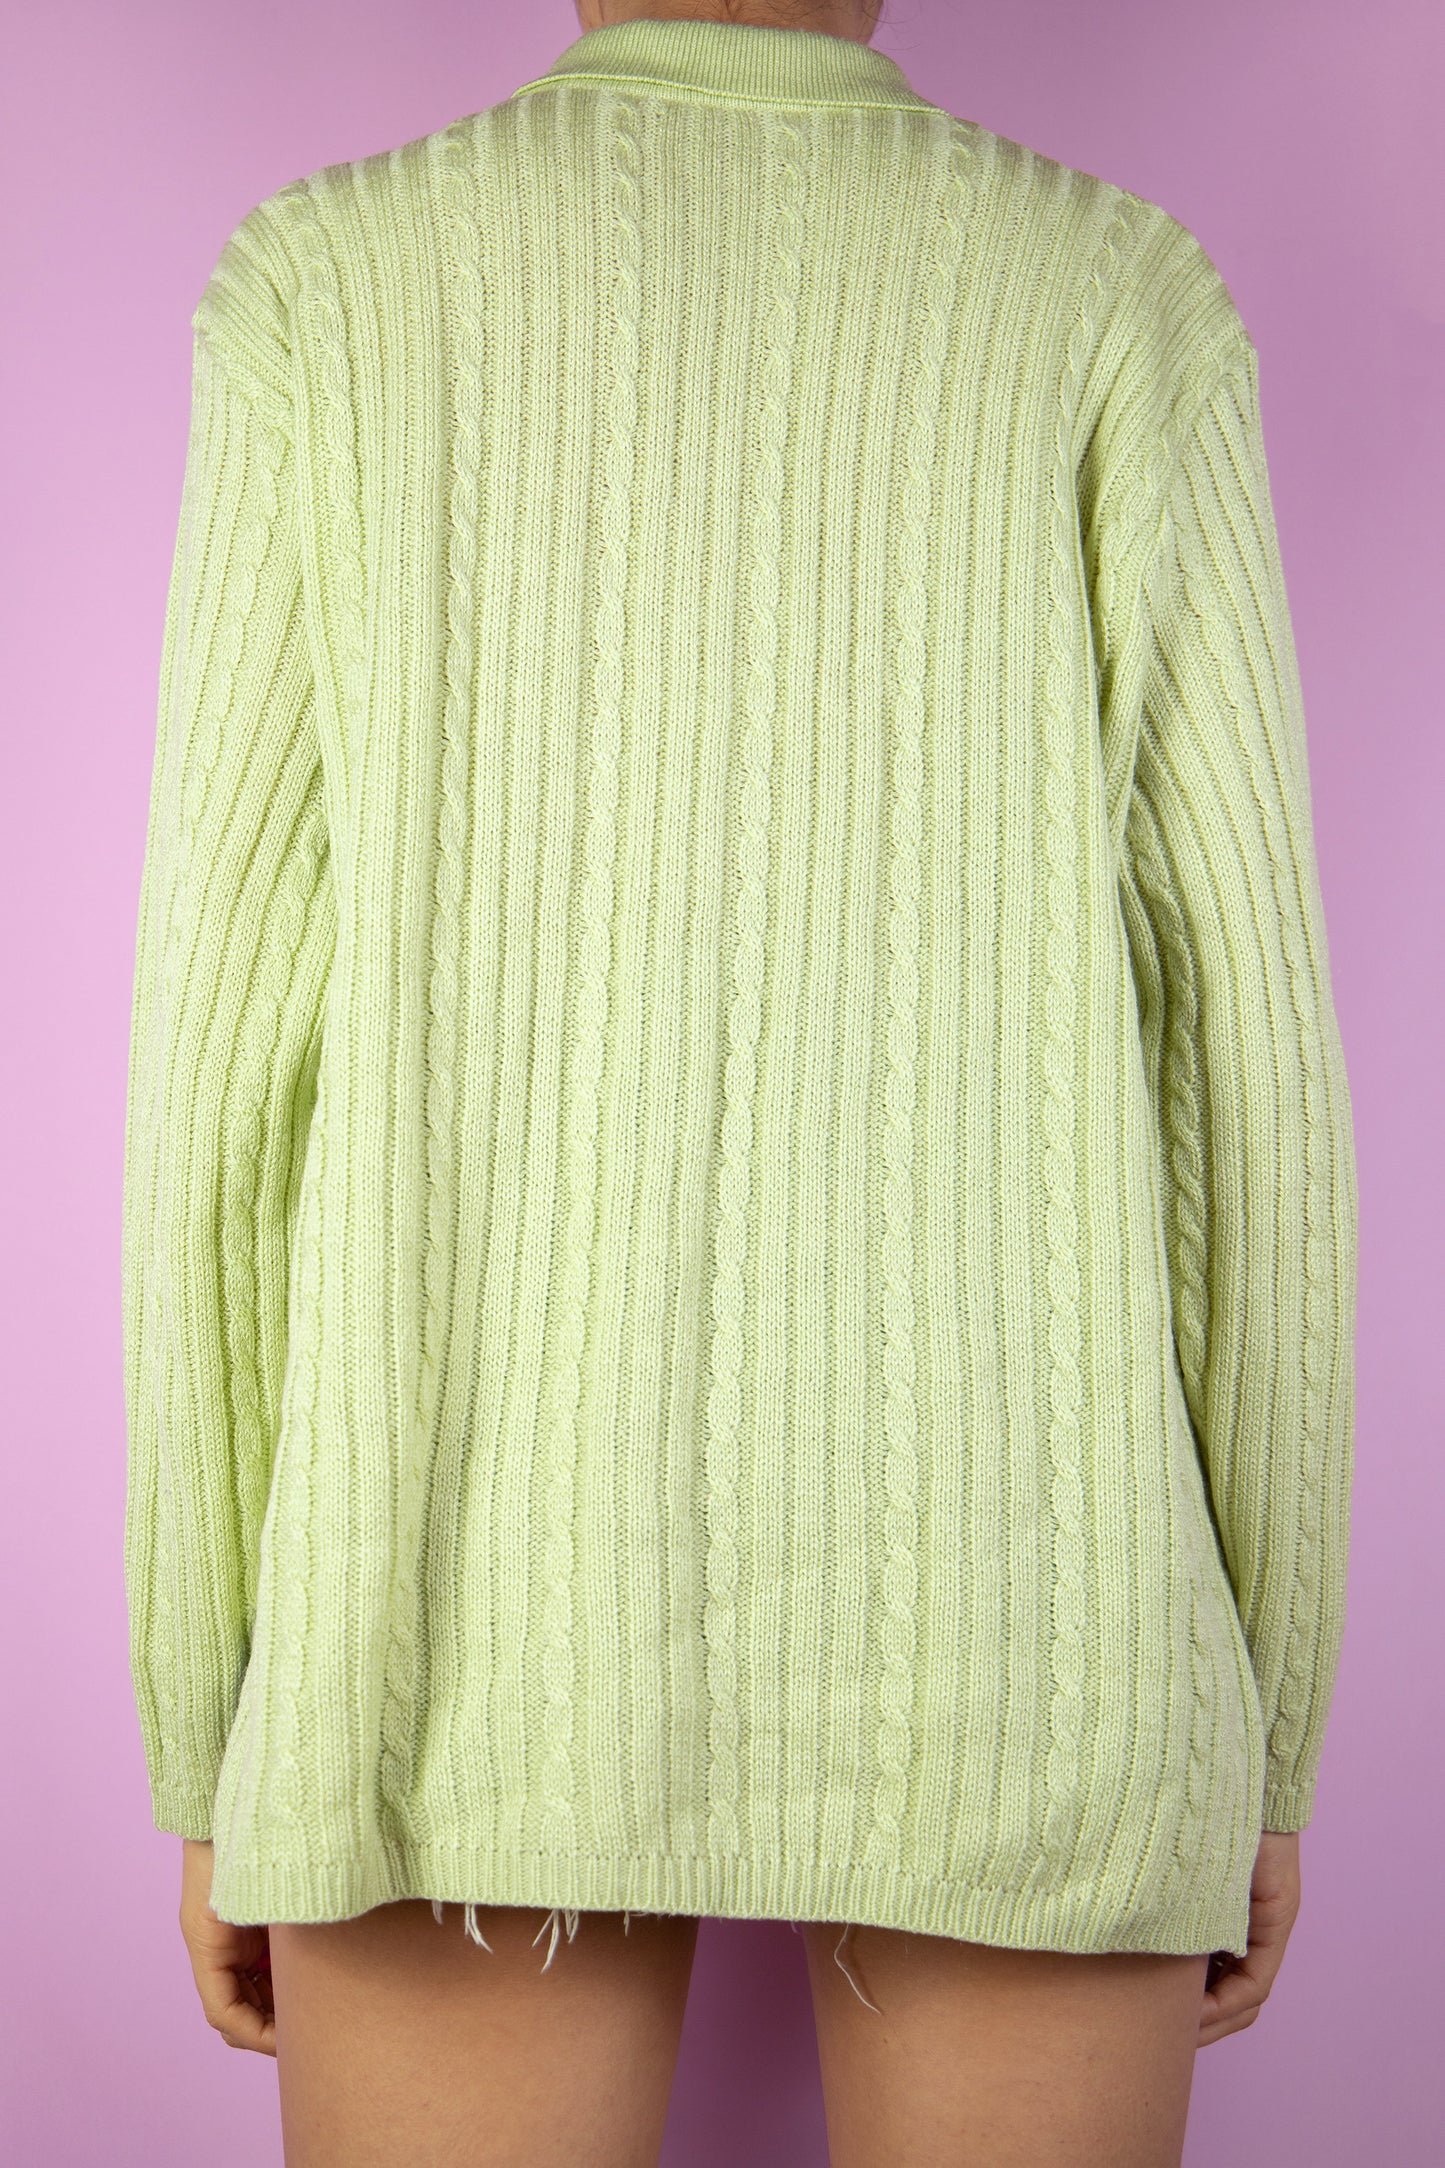 Vintage 90's Light Green Cable Knit Sweater - XL